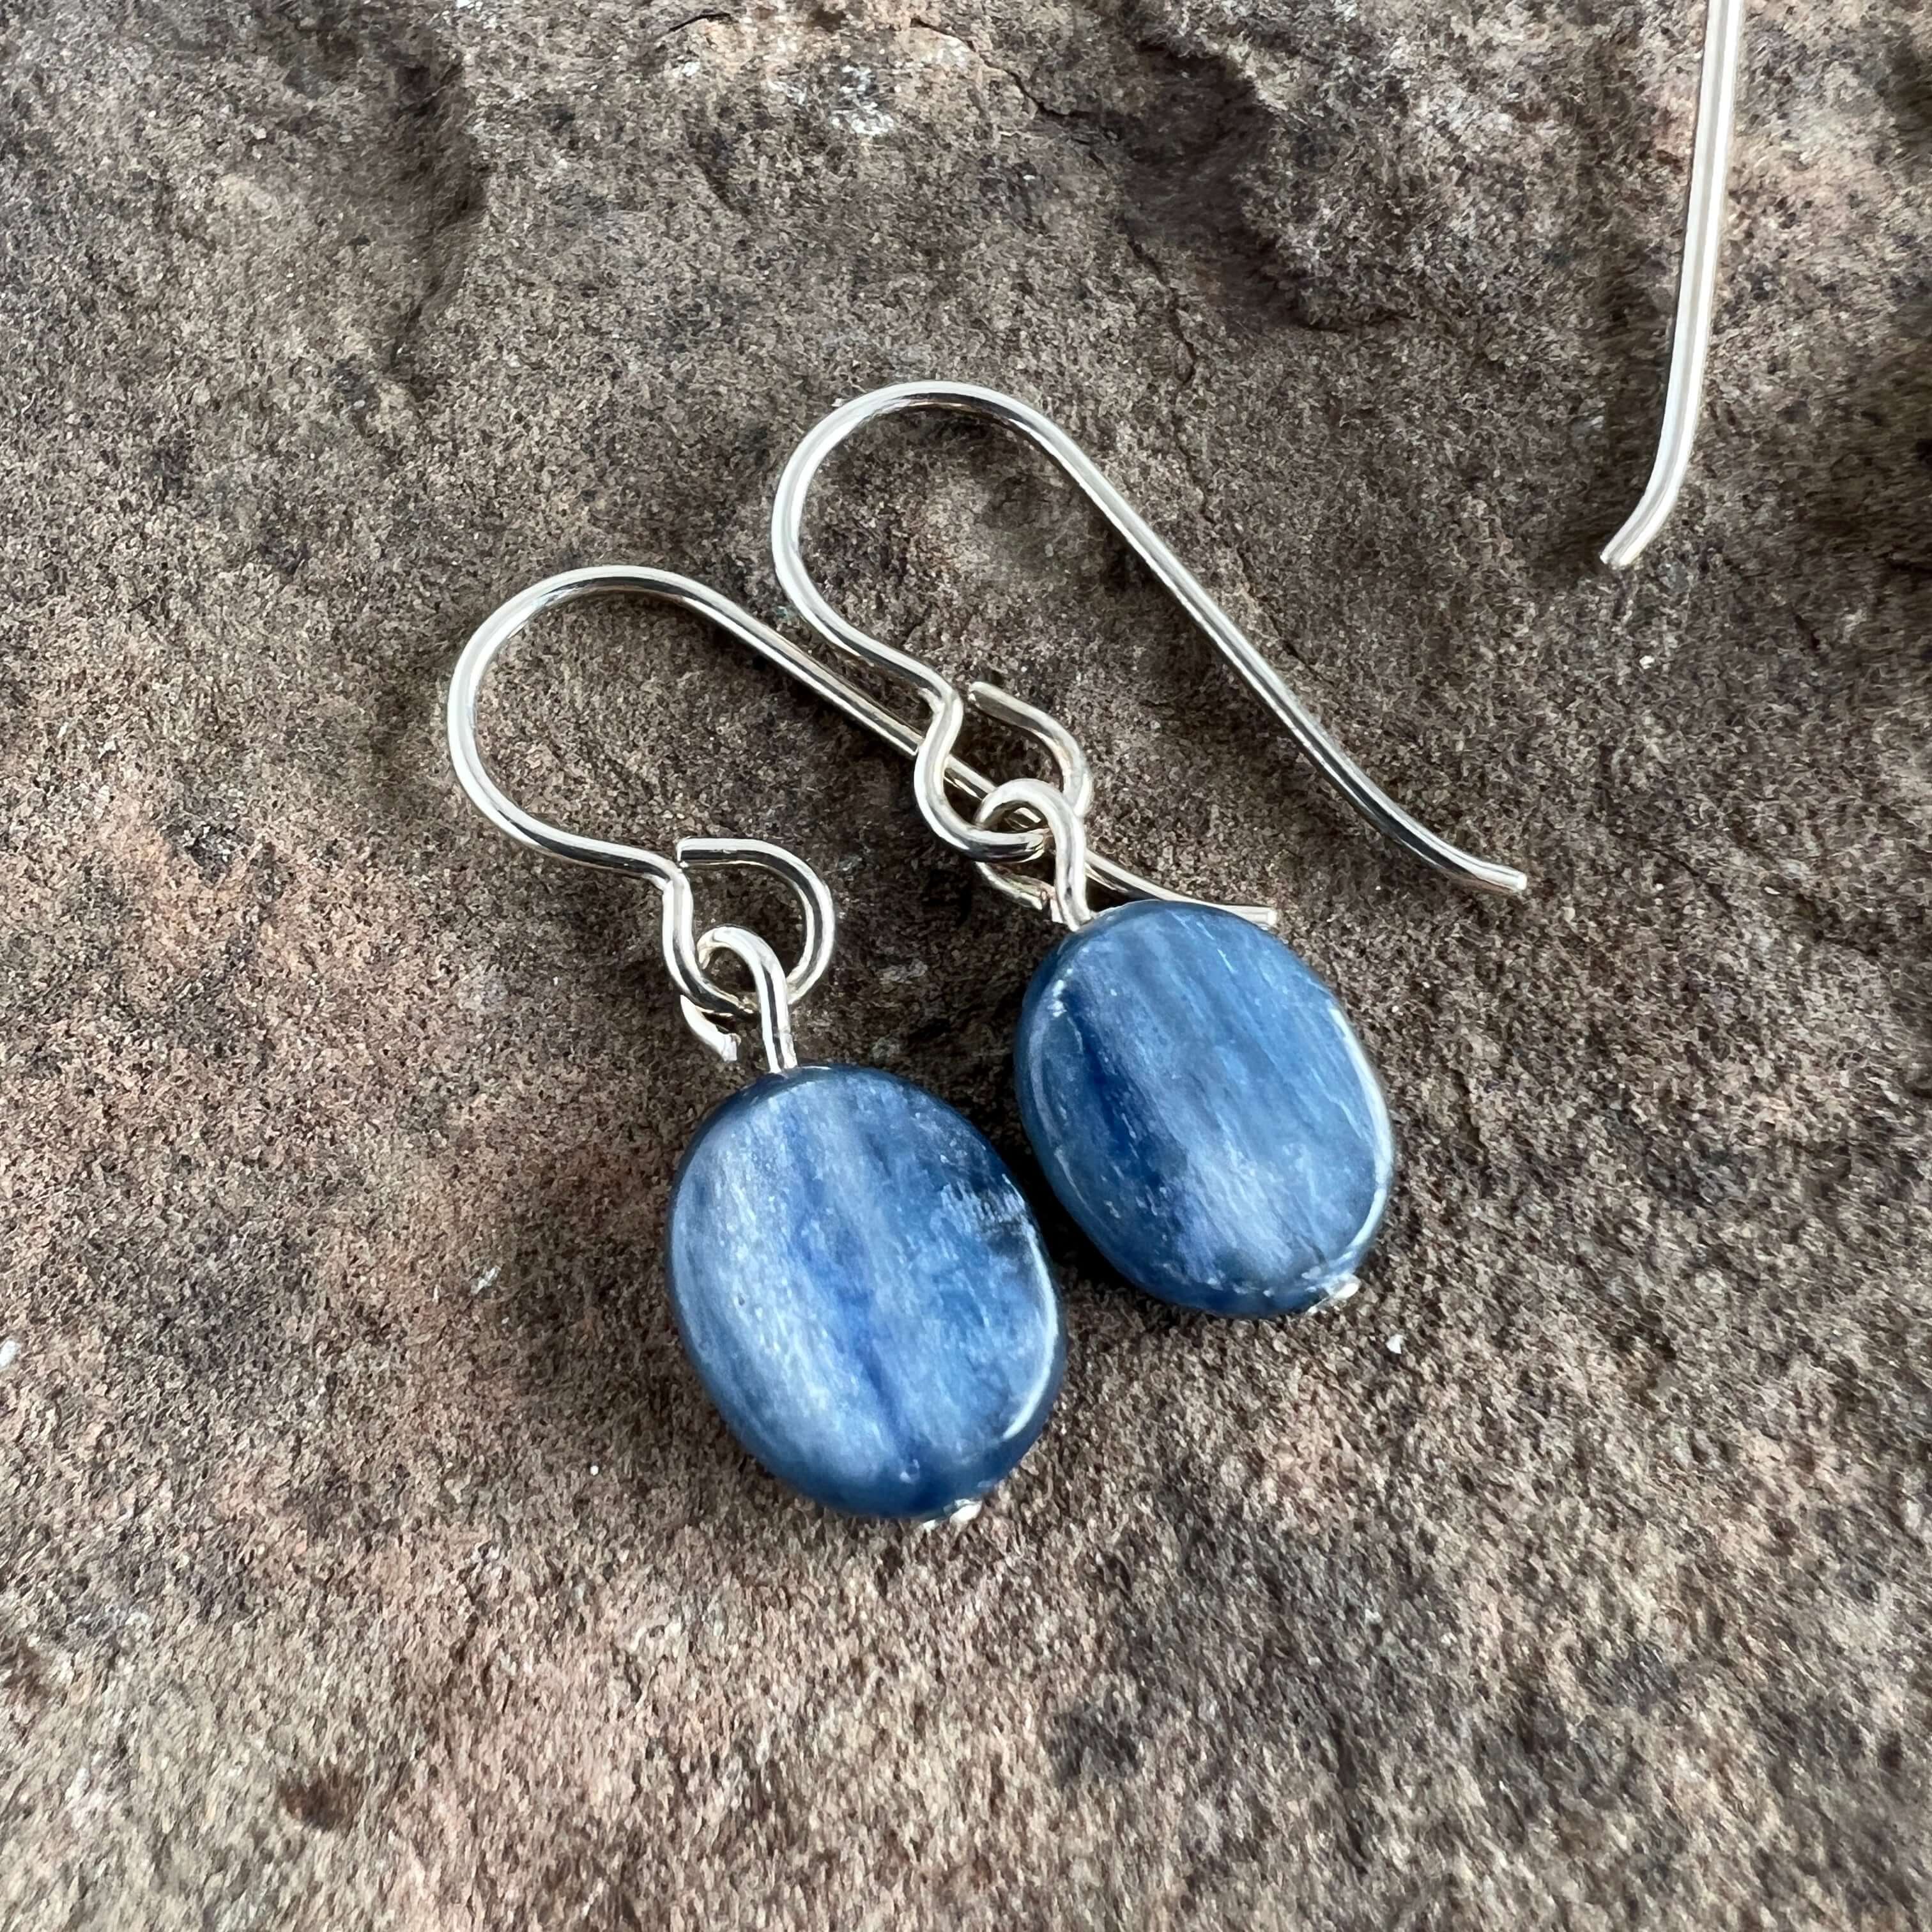 Kyanite Earrings These earrings are made with Kyanite gemstones which help in seeking truth through focus and logic. Zodiac Signs: Aries, Taurus & Libra. Chakras: All. Handmade with authentic crystals & gemstones in Minneapolis, MN.